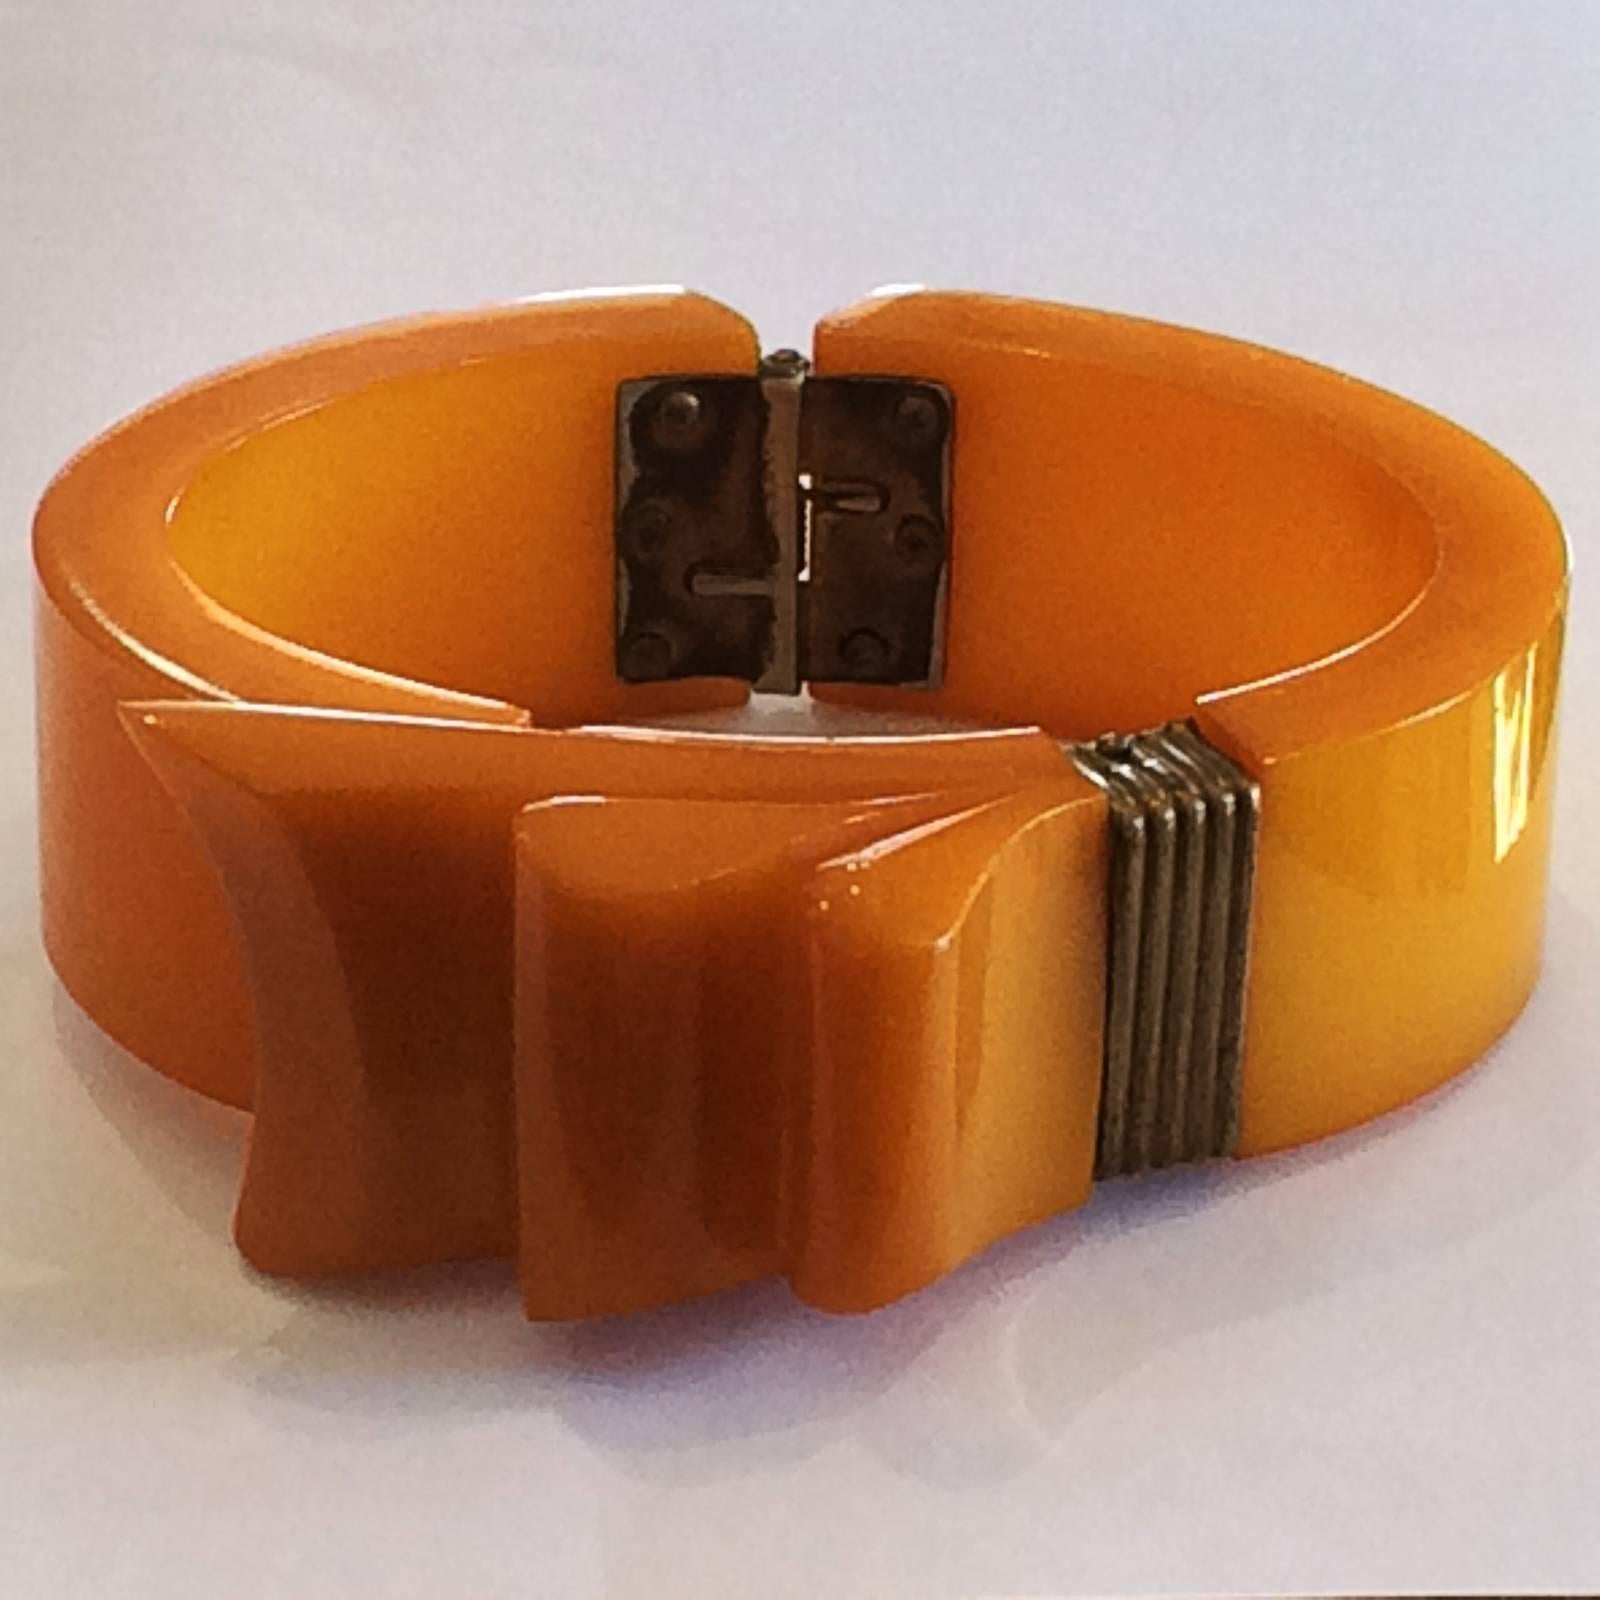 Very Rare Art Deco Clamper Bangle, a “Book Piece” and Internationally recognised 